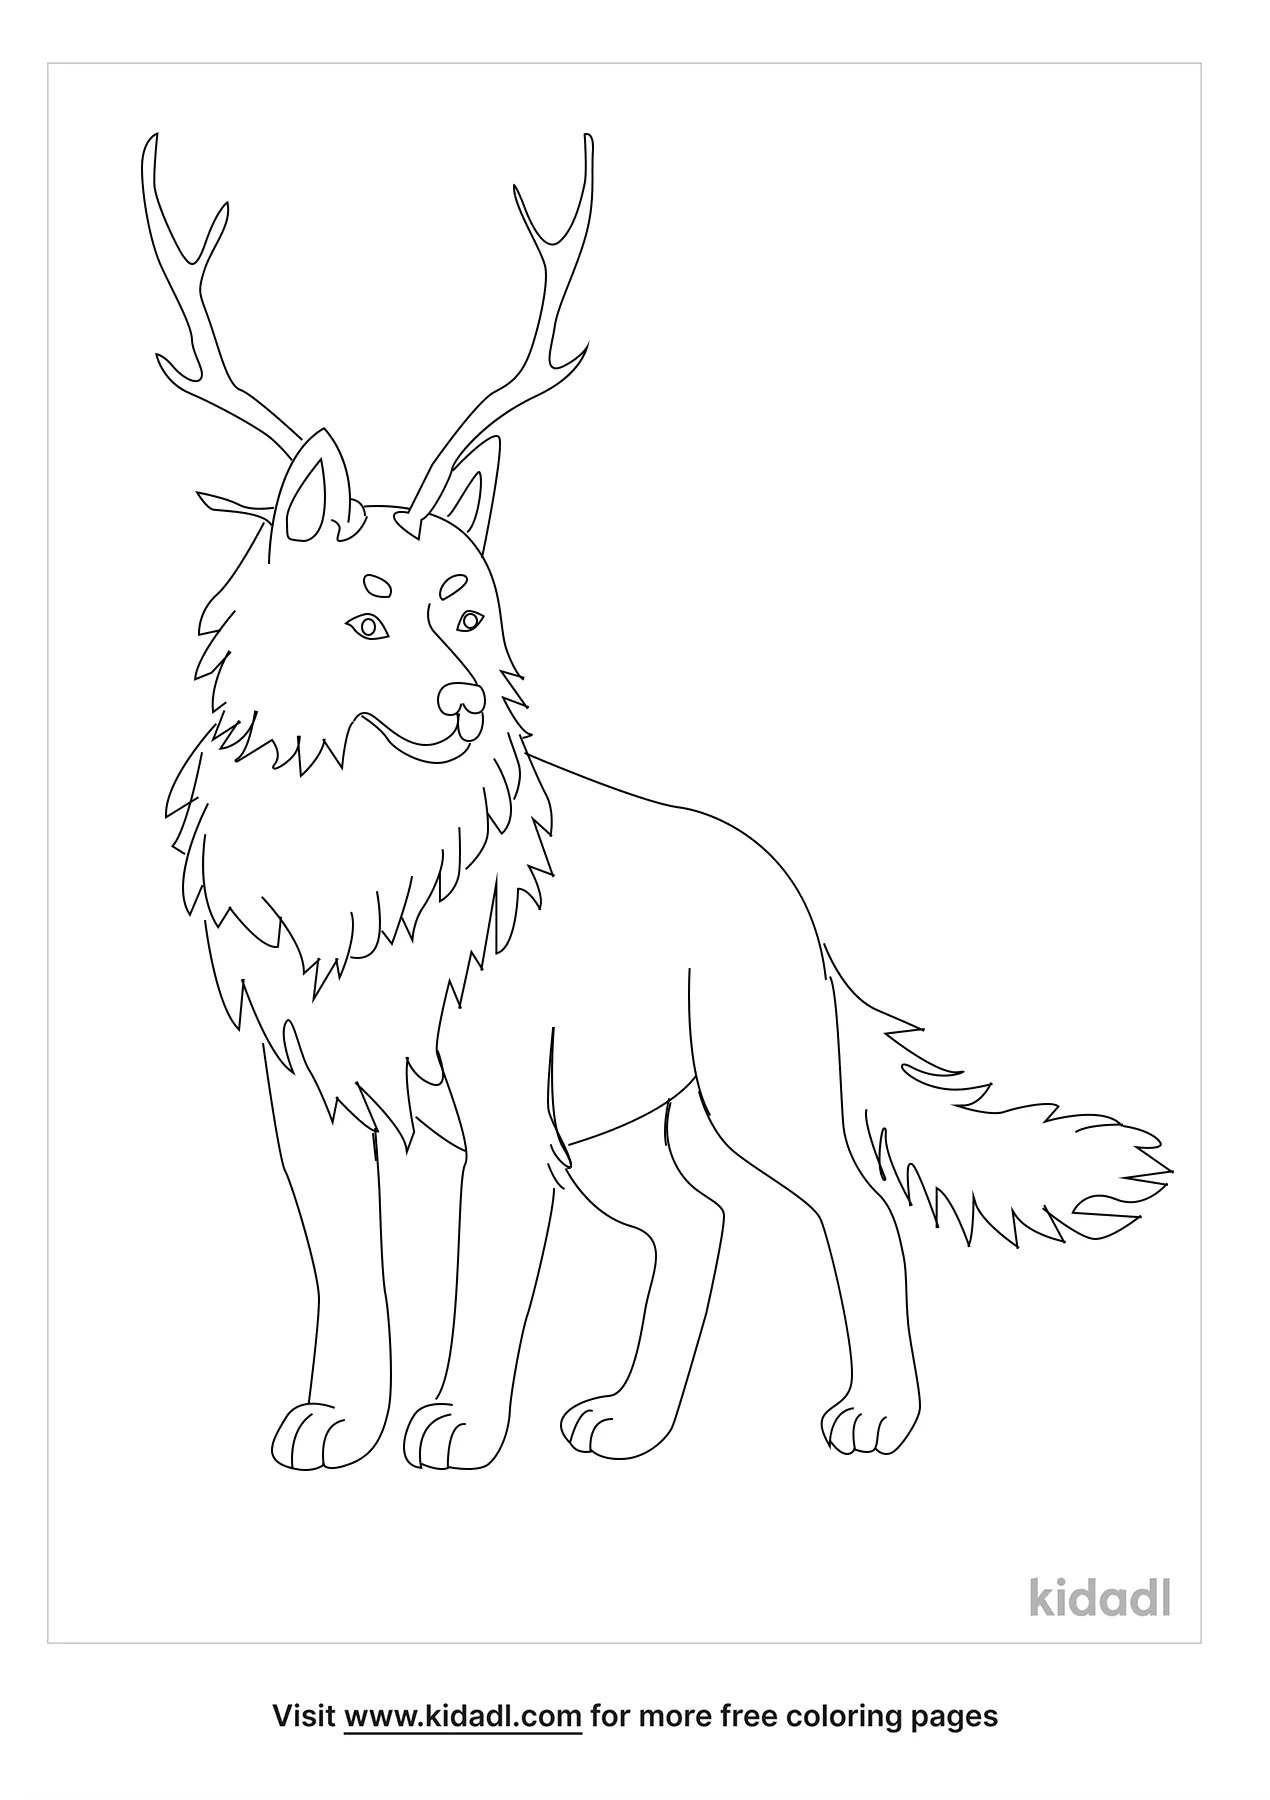 Wolf With Antlers Coloring Page